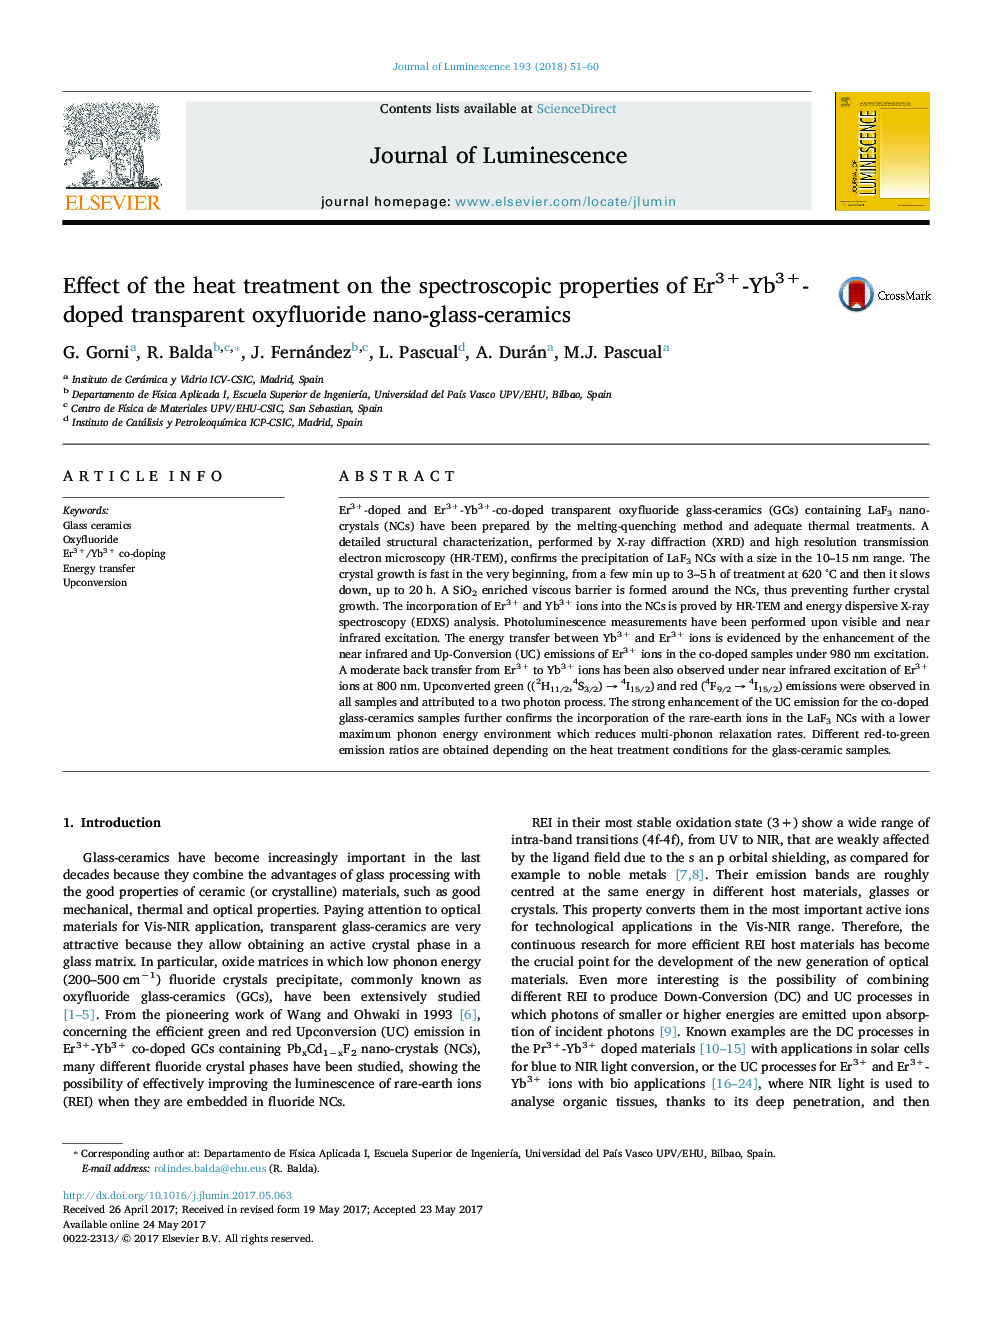 Effect of the heat treatment on the spectroscopic properties of Er3+-Yb3+-doped transparent oxyfluoride nano-glass-ceramics